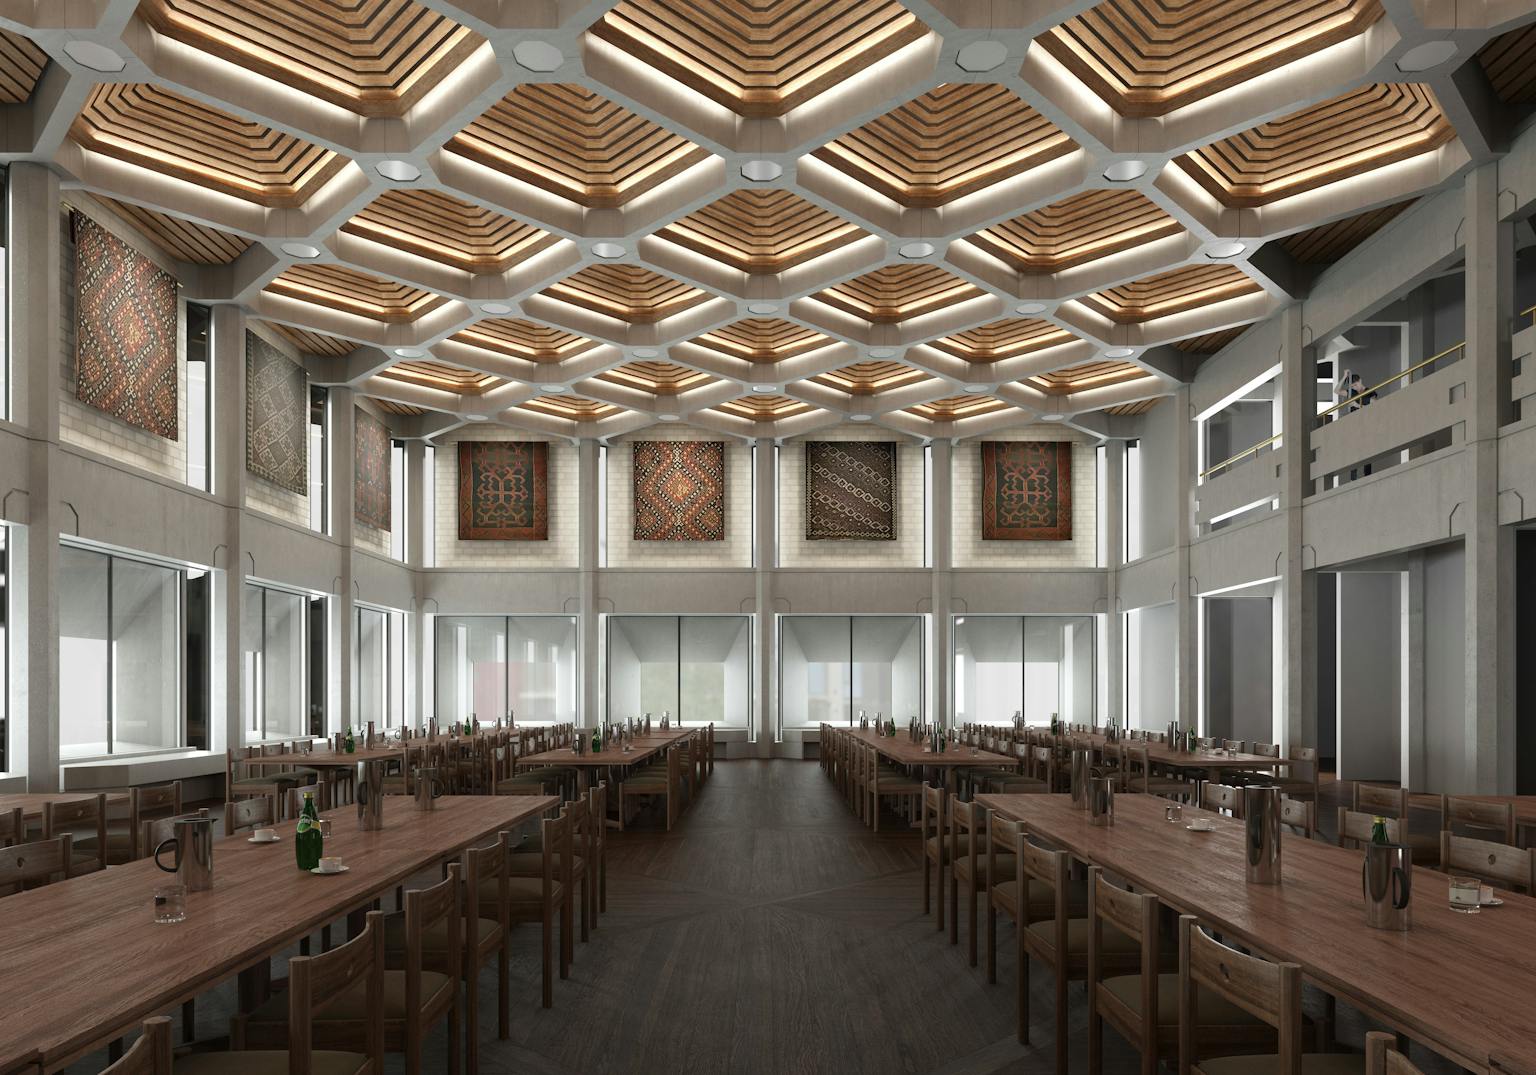 A visual representation of the refurbished buttery, now complete